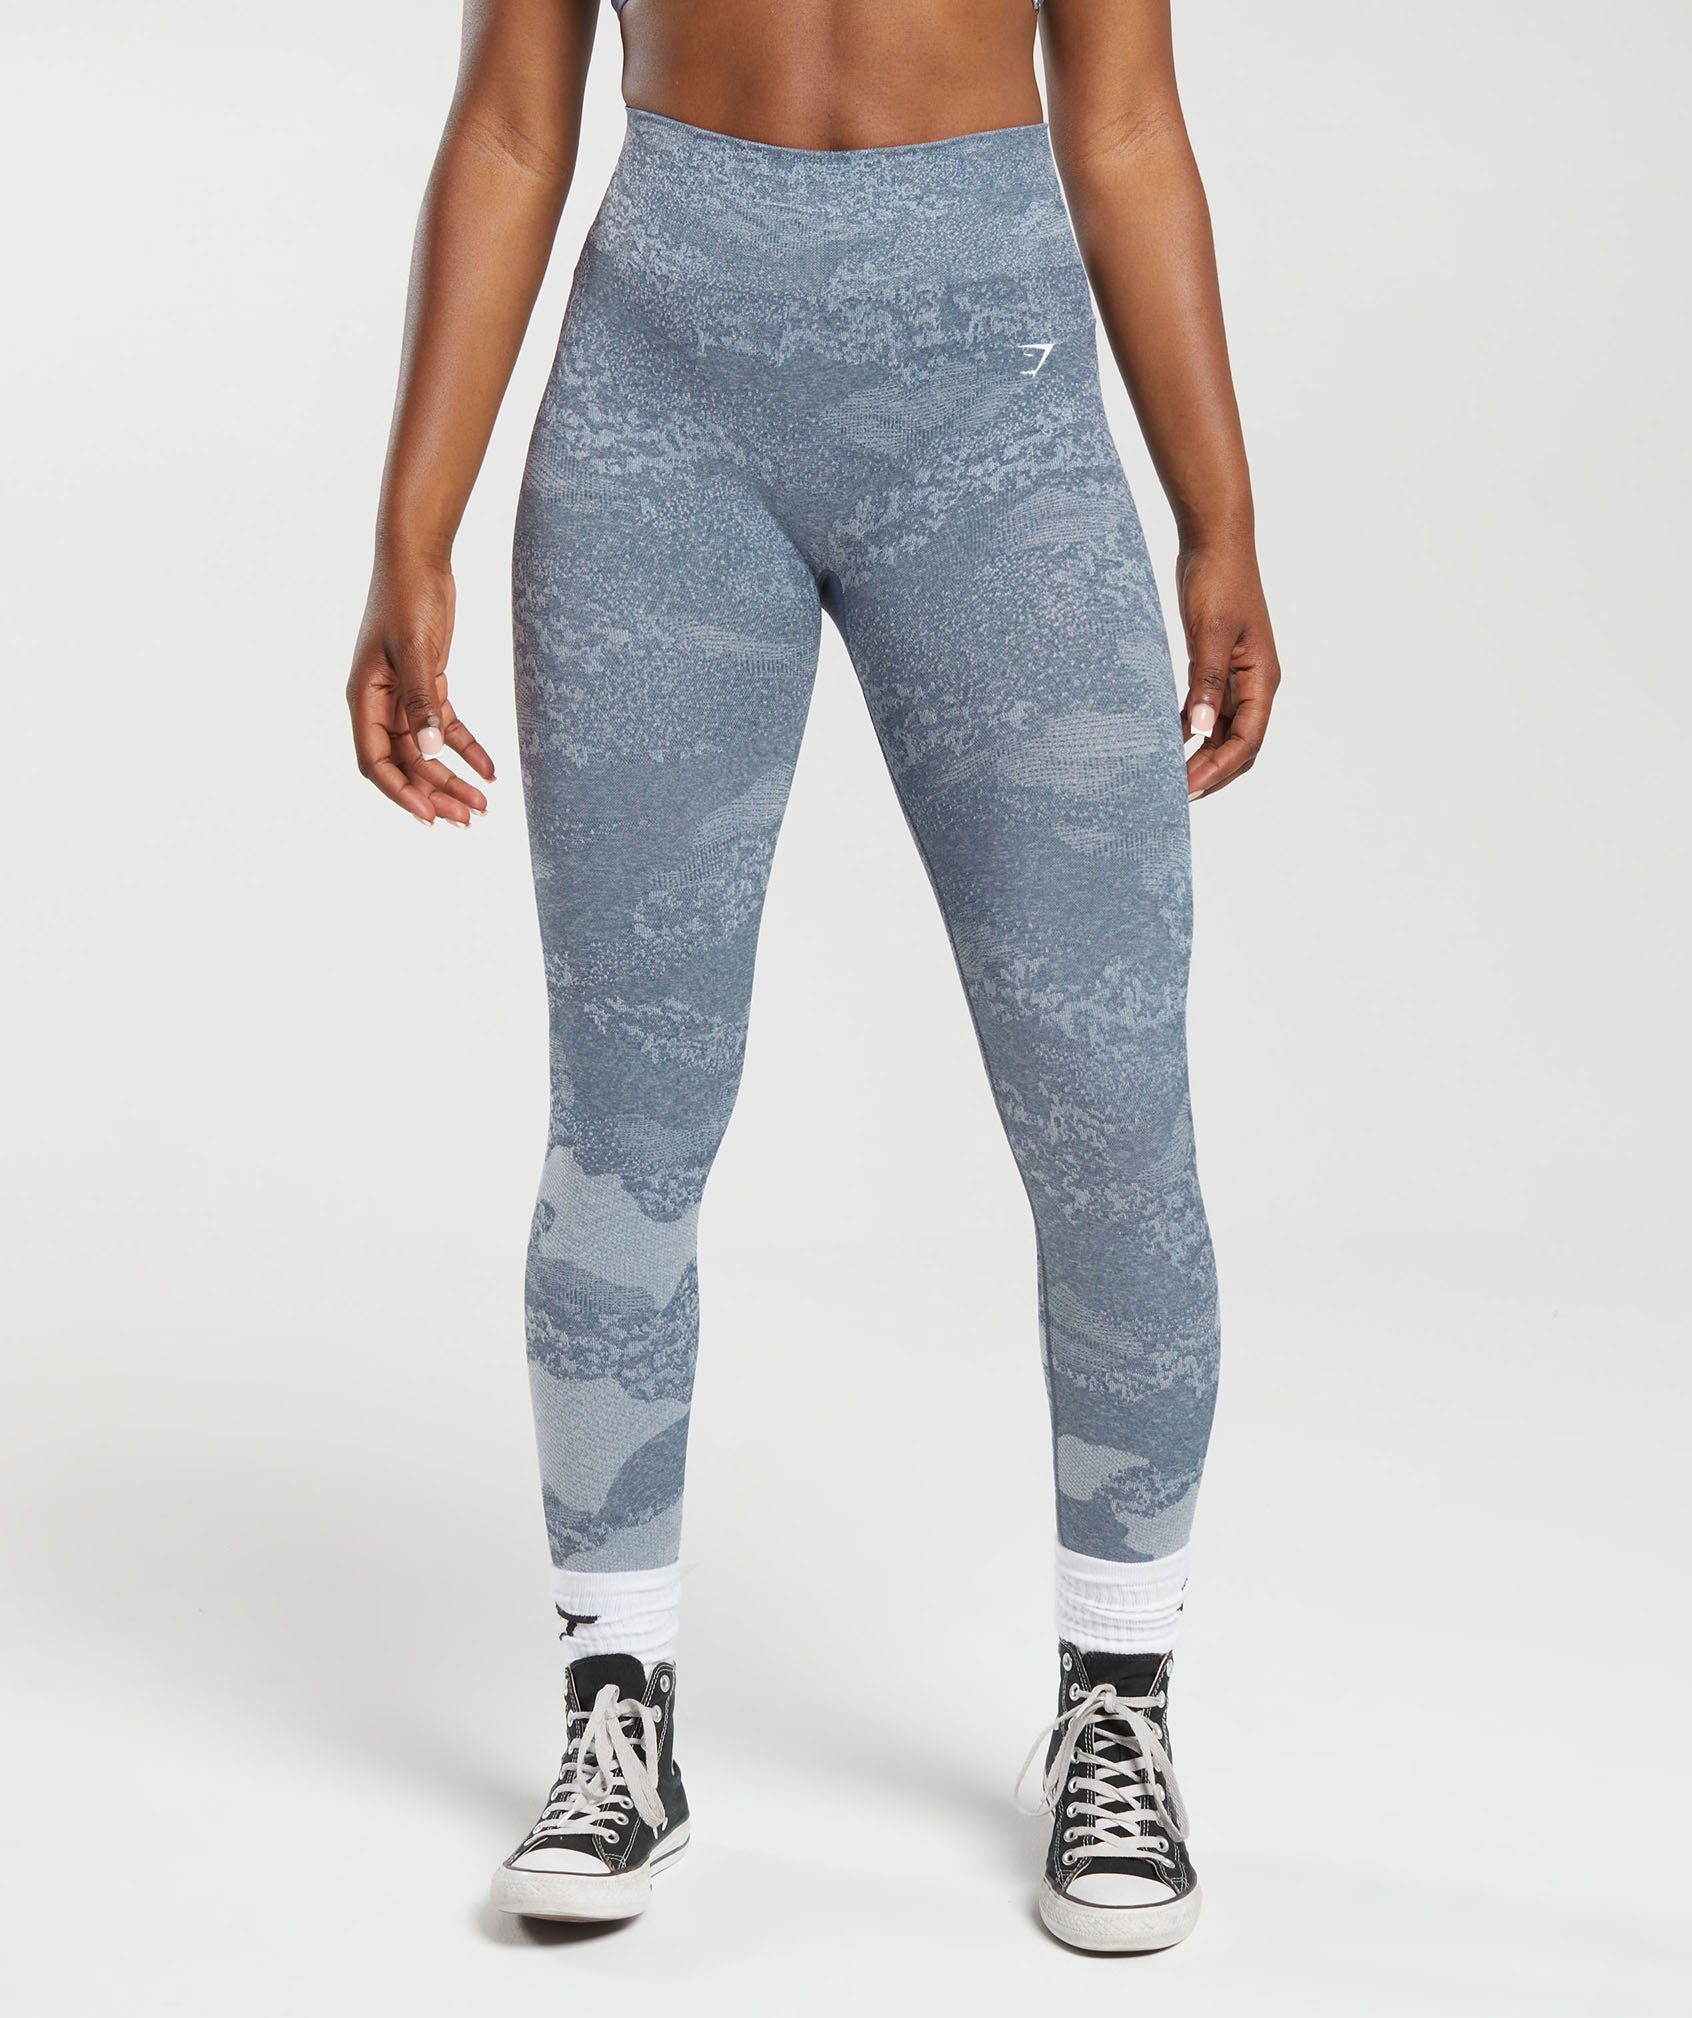 Adapt Camo Seamless Leggings in  River Stone Grey/Evening Blue - view 1